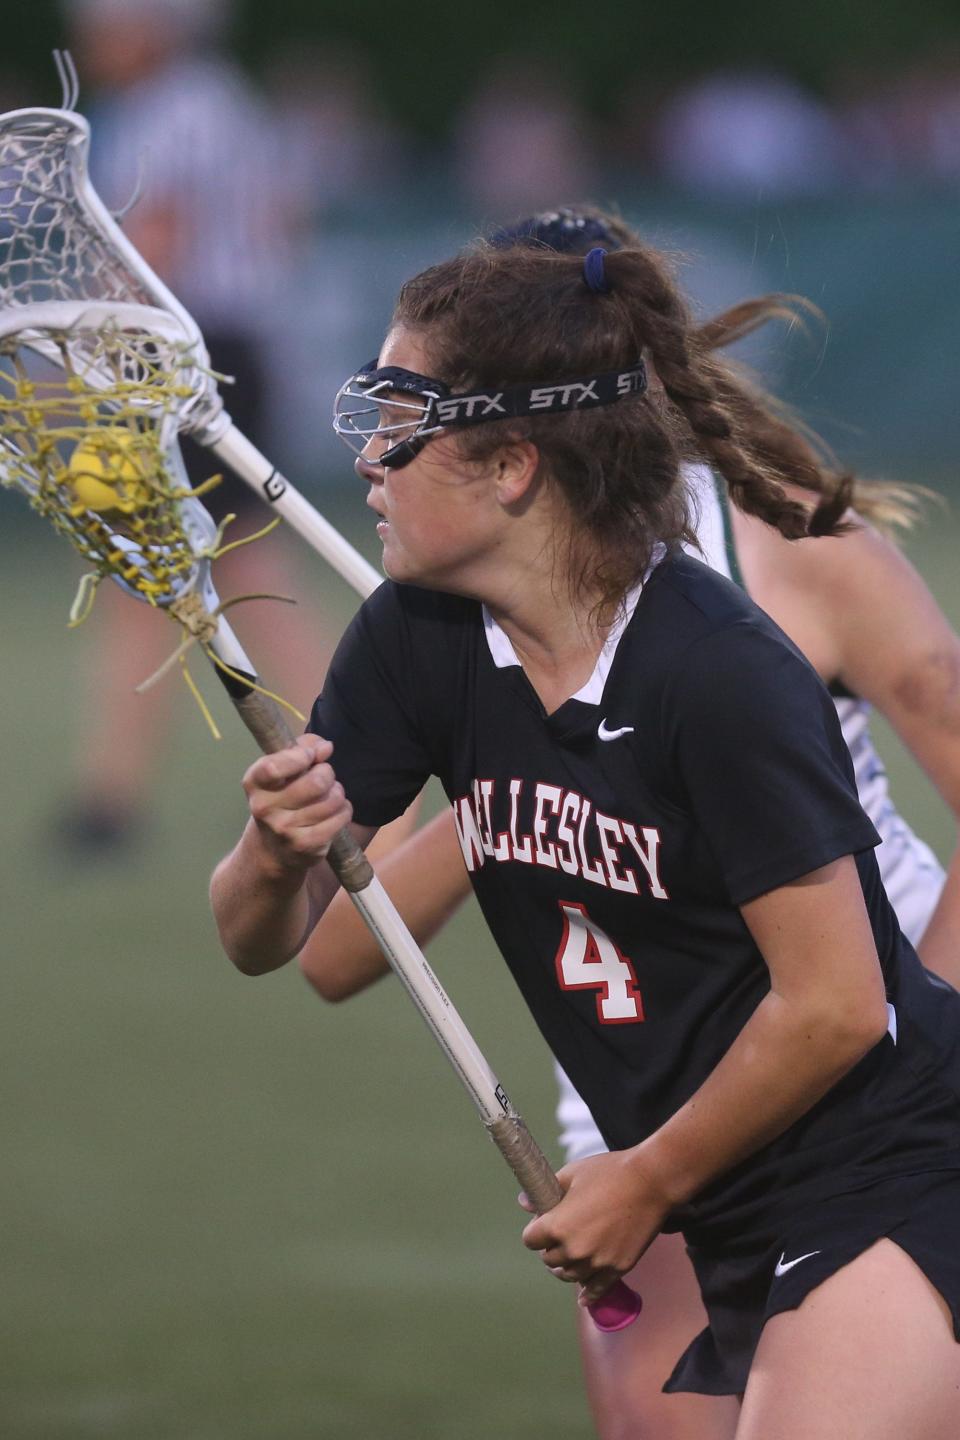 Wellesley freshman Kaitlyn Uller looks for an open teammate during the Division 1 state championship game against Westwood at Babson College in Wellesley on June 20, 2022.